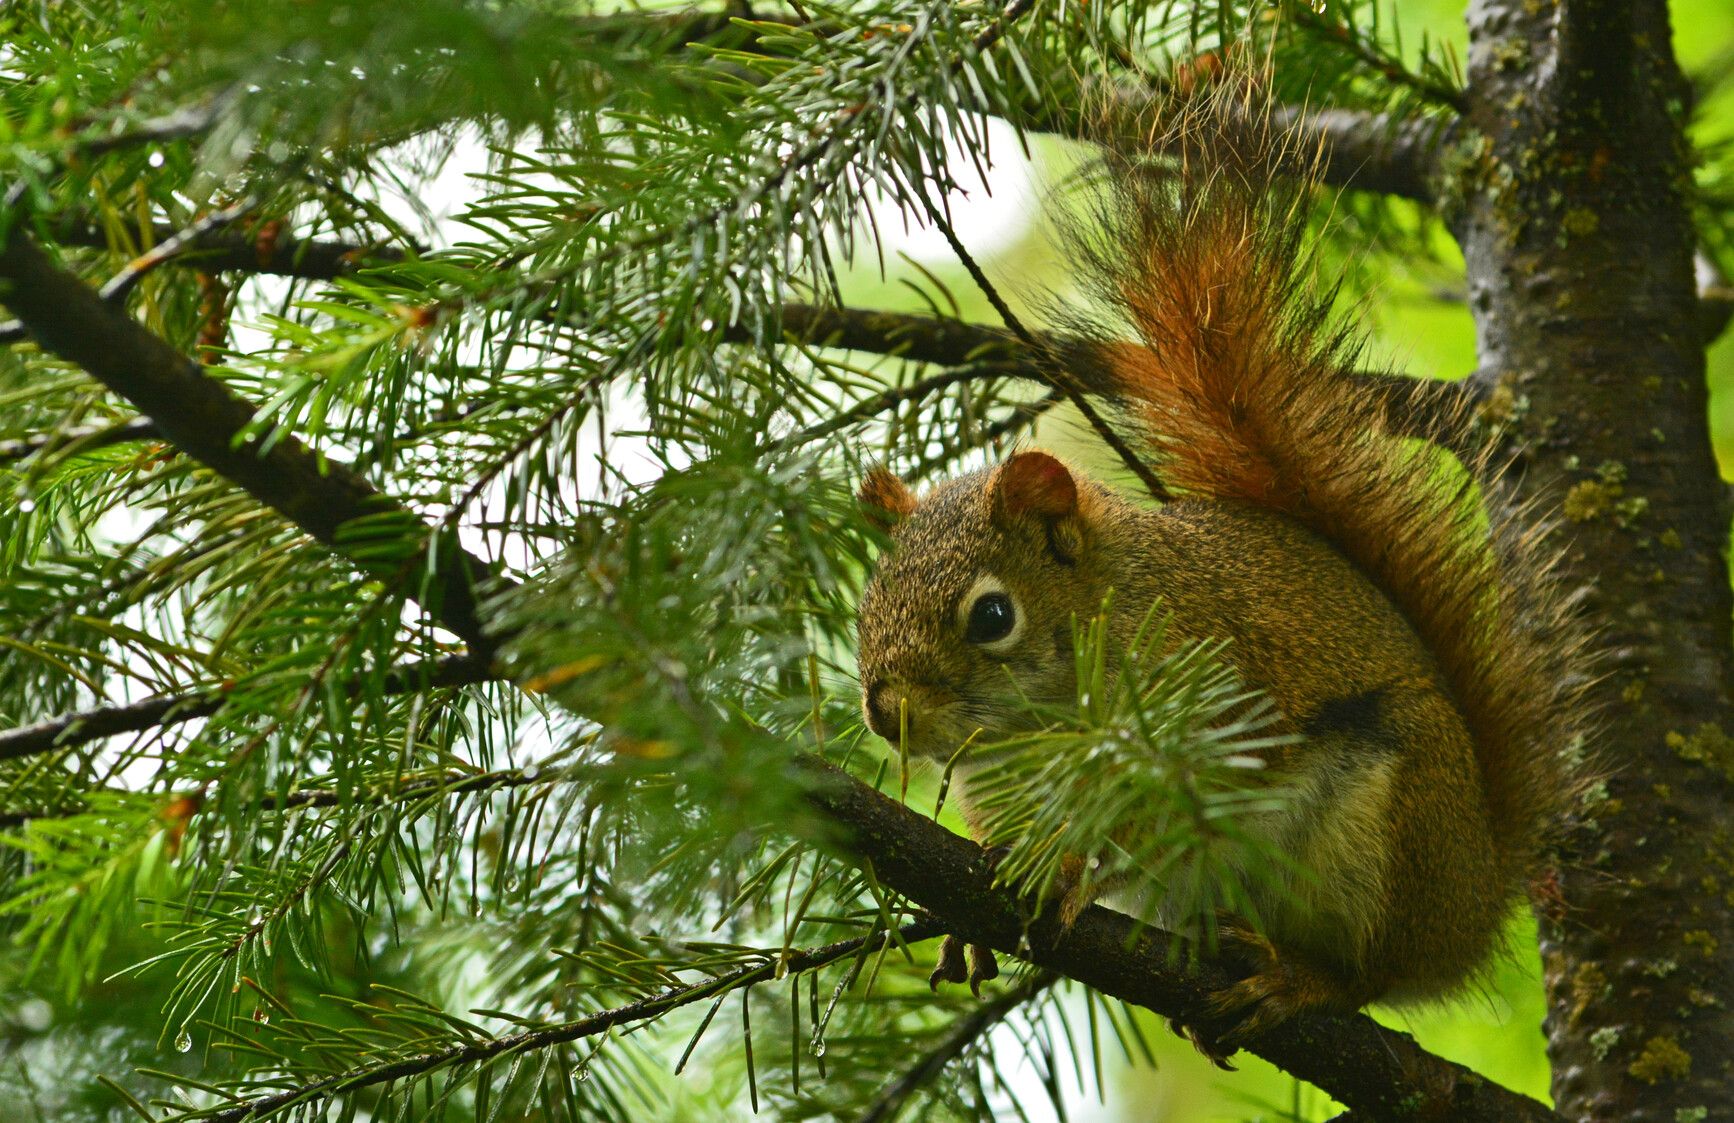 American red squirrel, one of the many species living in Horsefly Lake Park.